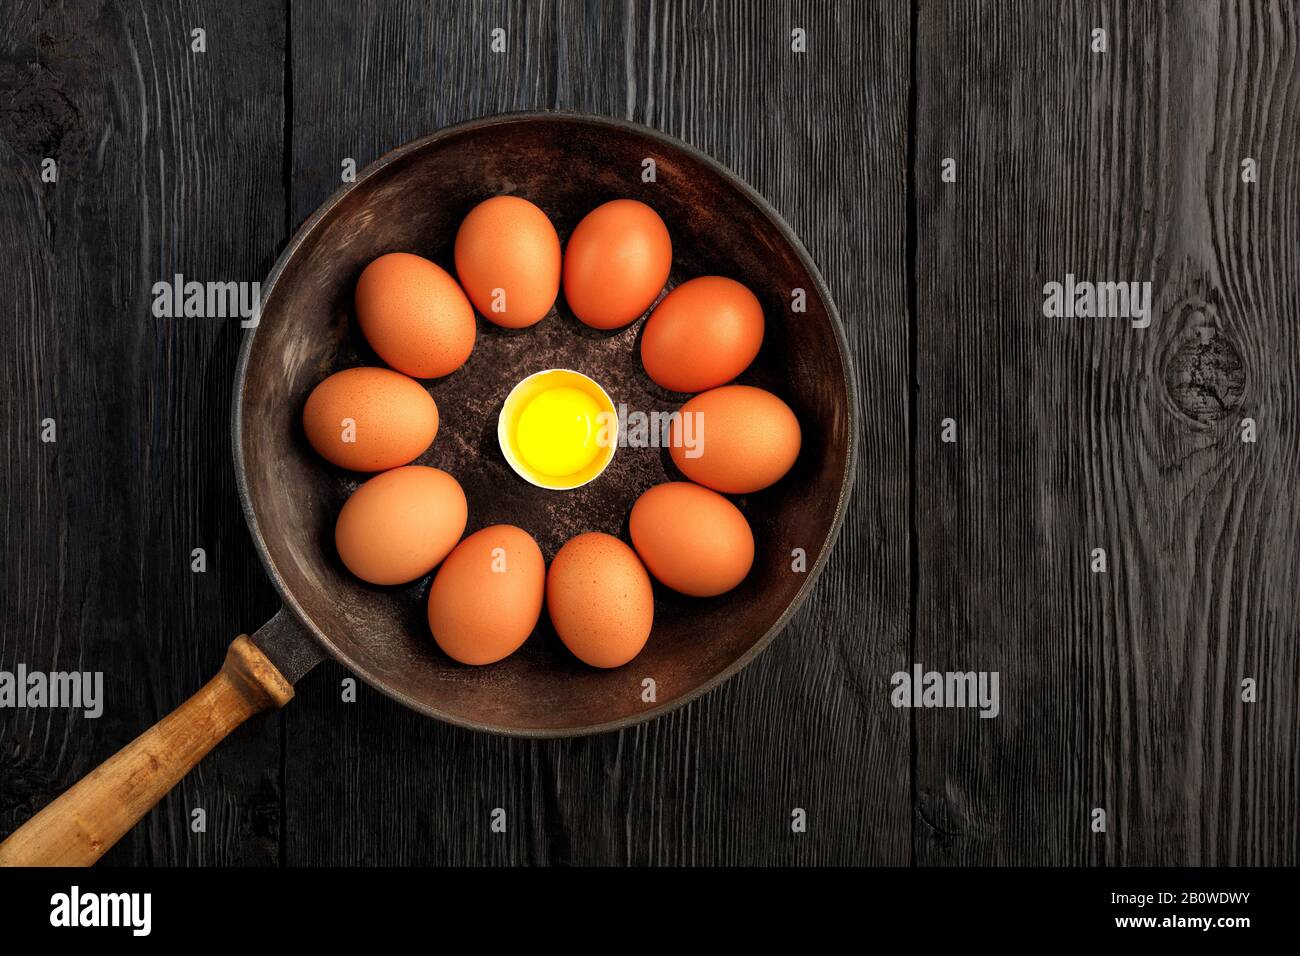 Ten brown chicken eggs in an old cast-iron skillet look in the center at a broken egg with a bright yolk. Stock Photo